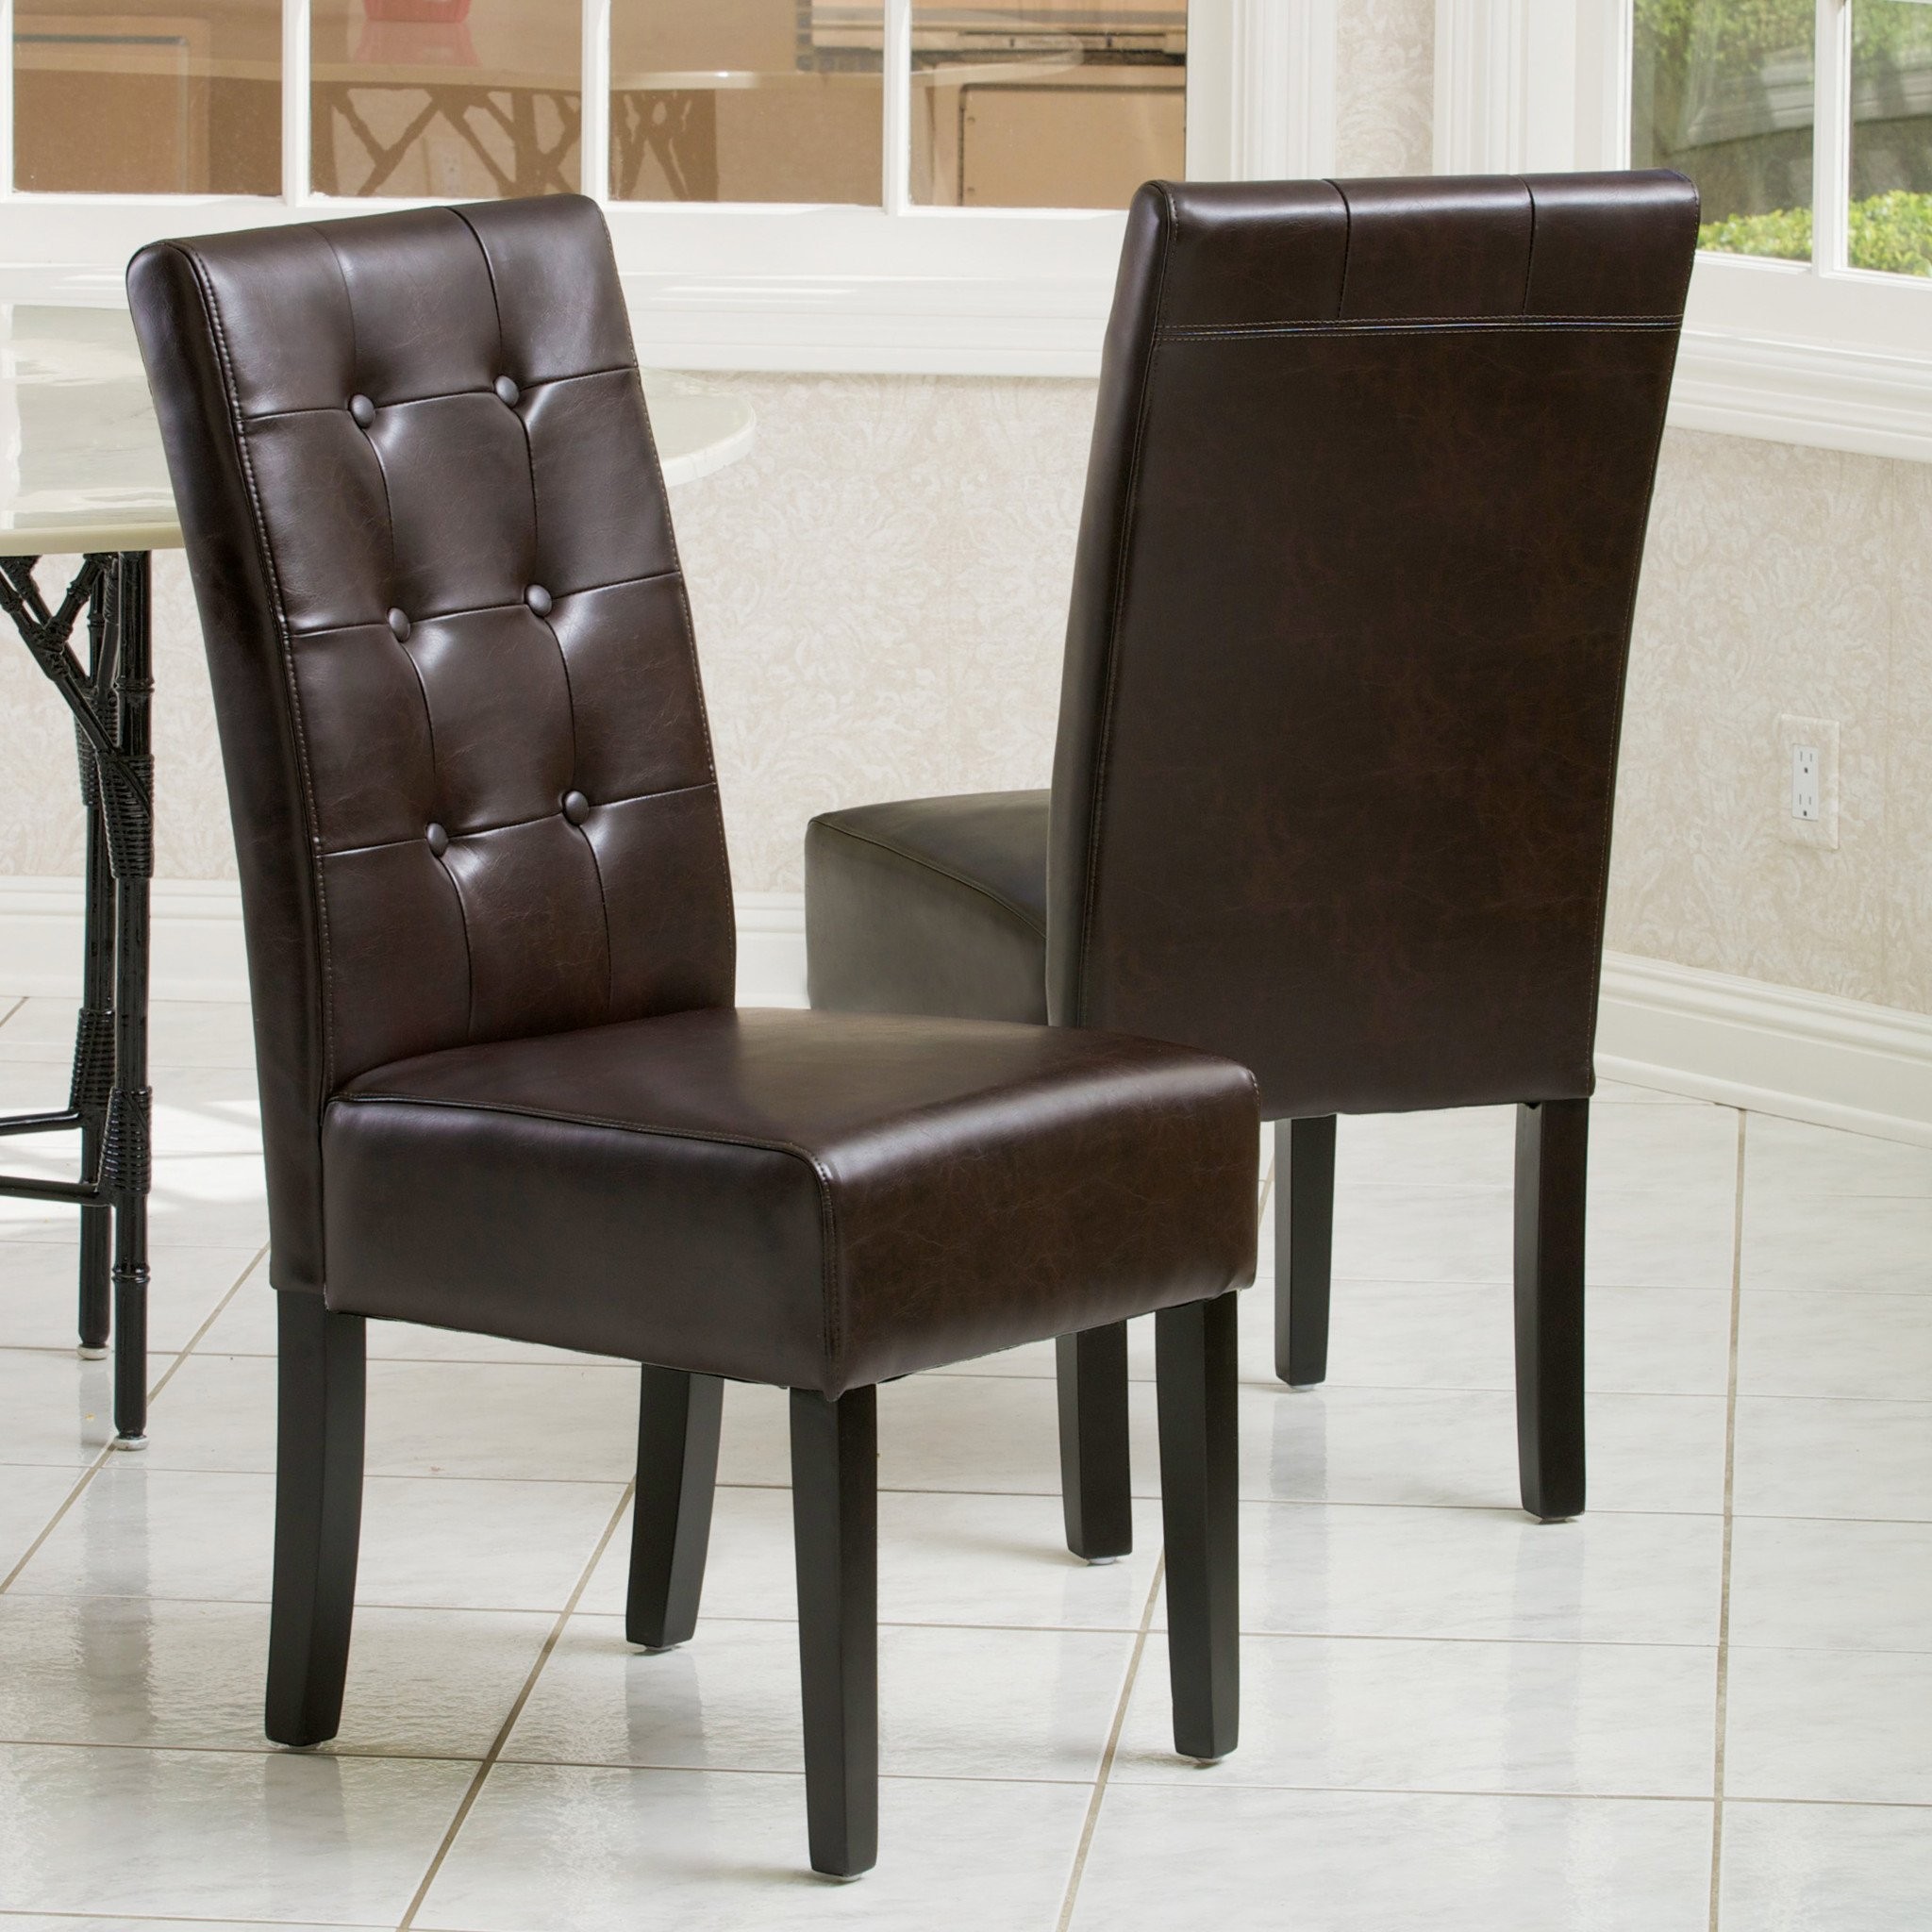 Addison Tufted Brown Leather Dining Chair (Set of...